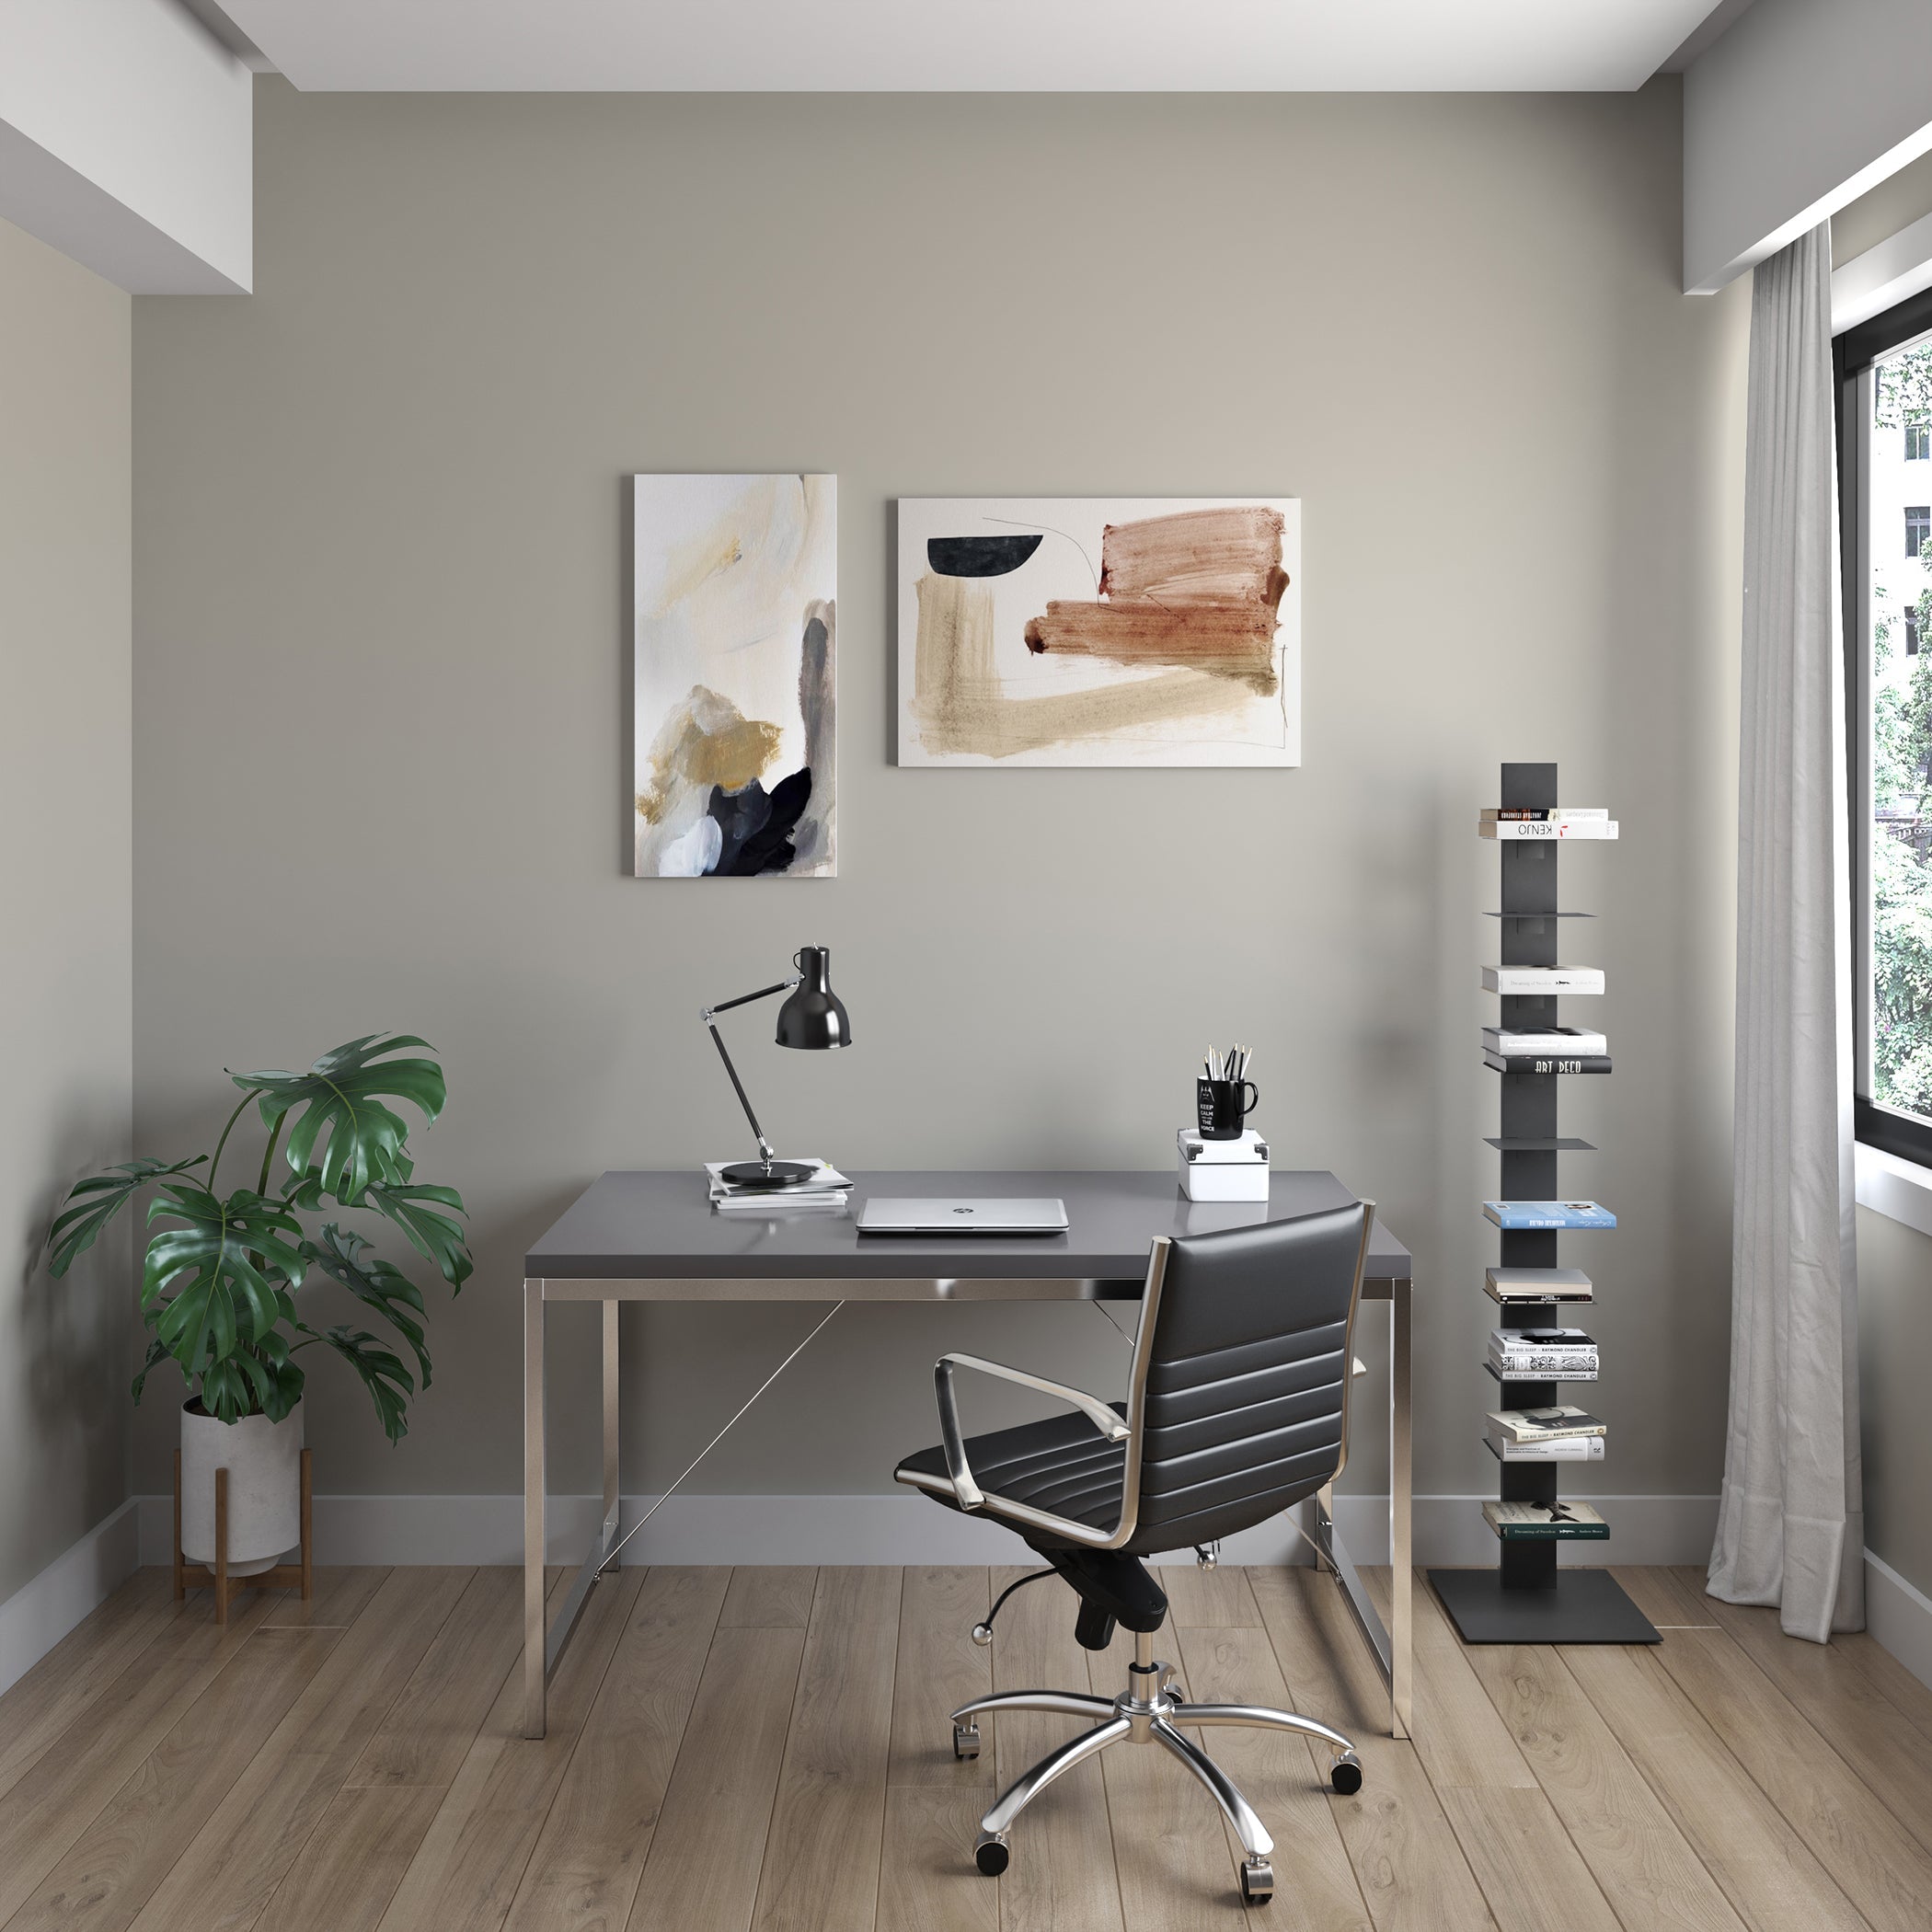 Dirk Low Back Office Chair - What A Room